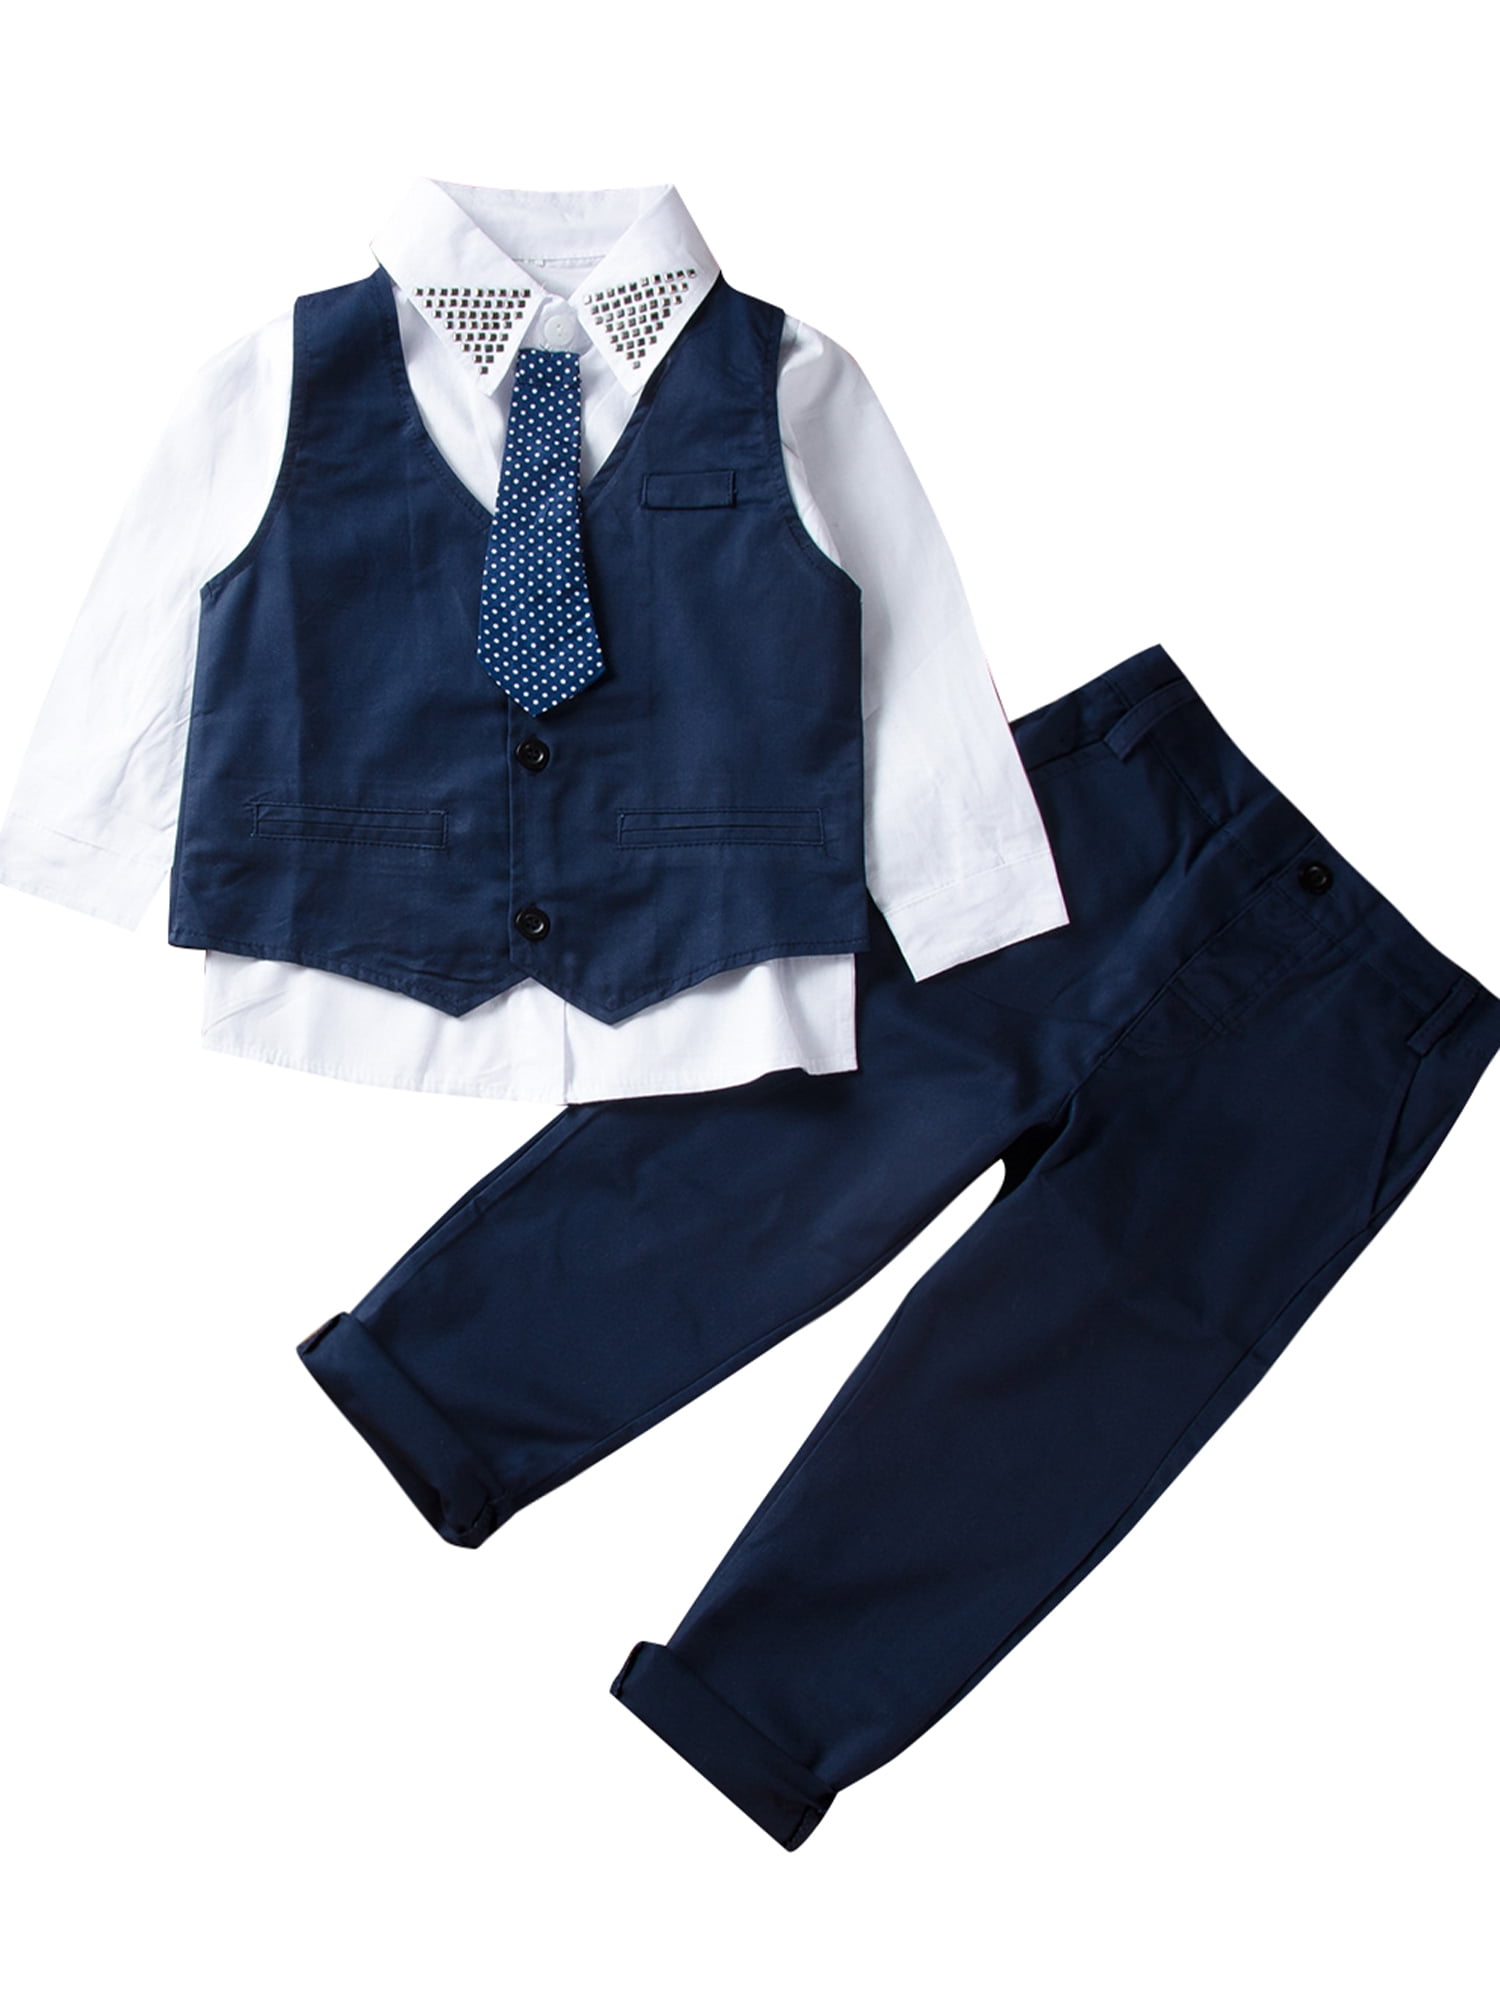 Buy famuka Baby Boy 3 Piece Formal Outfit Suit with Bows Waistcoat  Gentleman Tuxedo (Navy 3, 0-3 Months) at Amazon.in